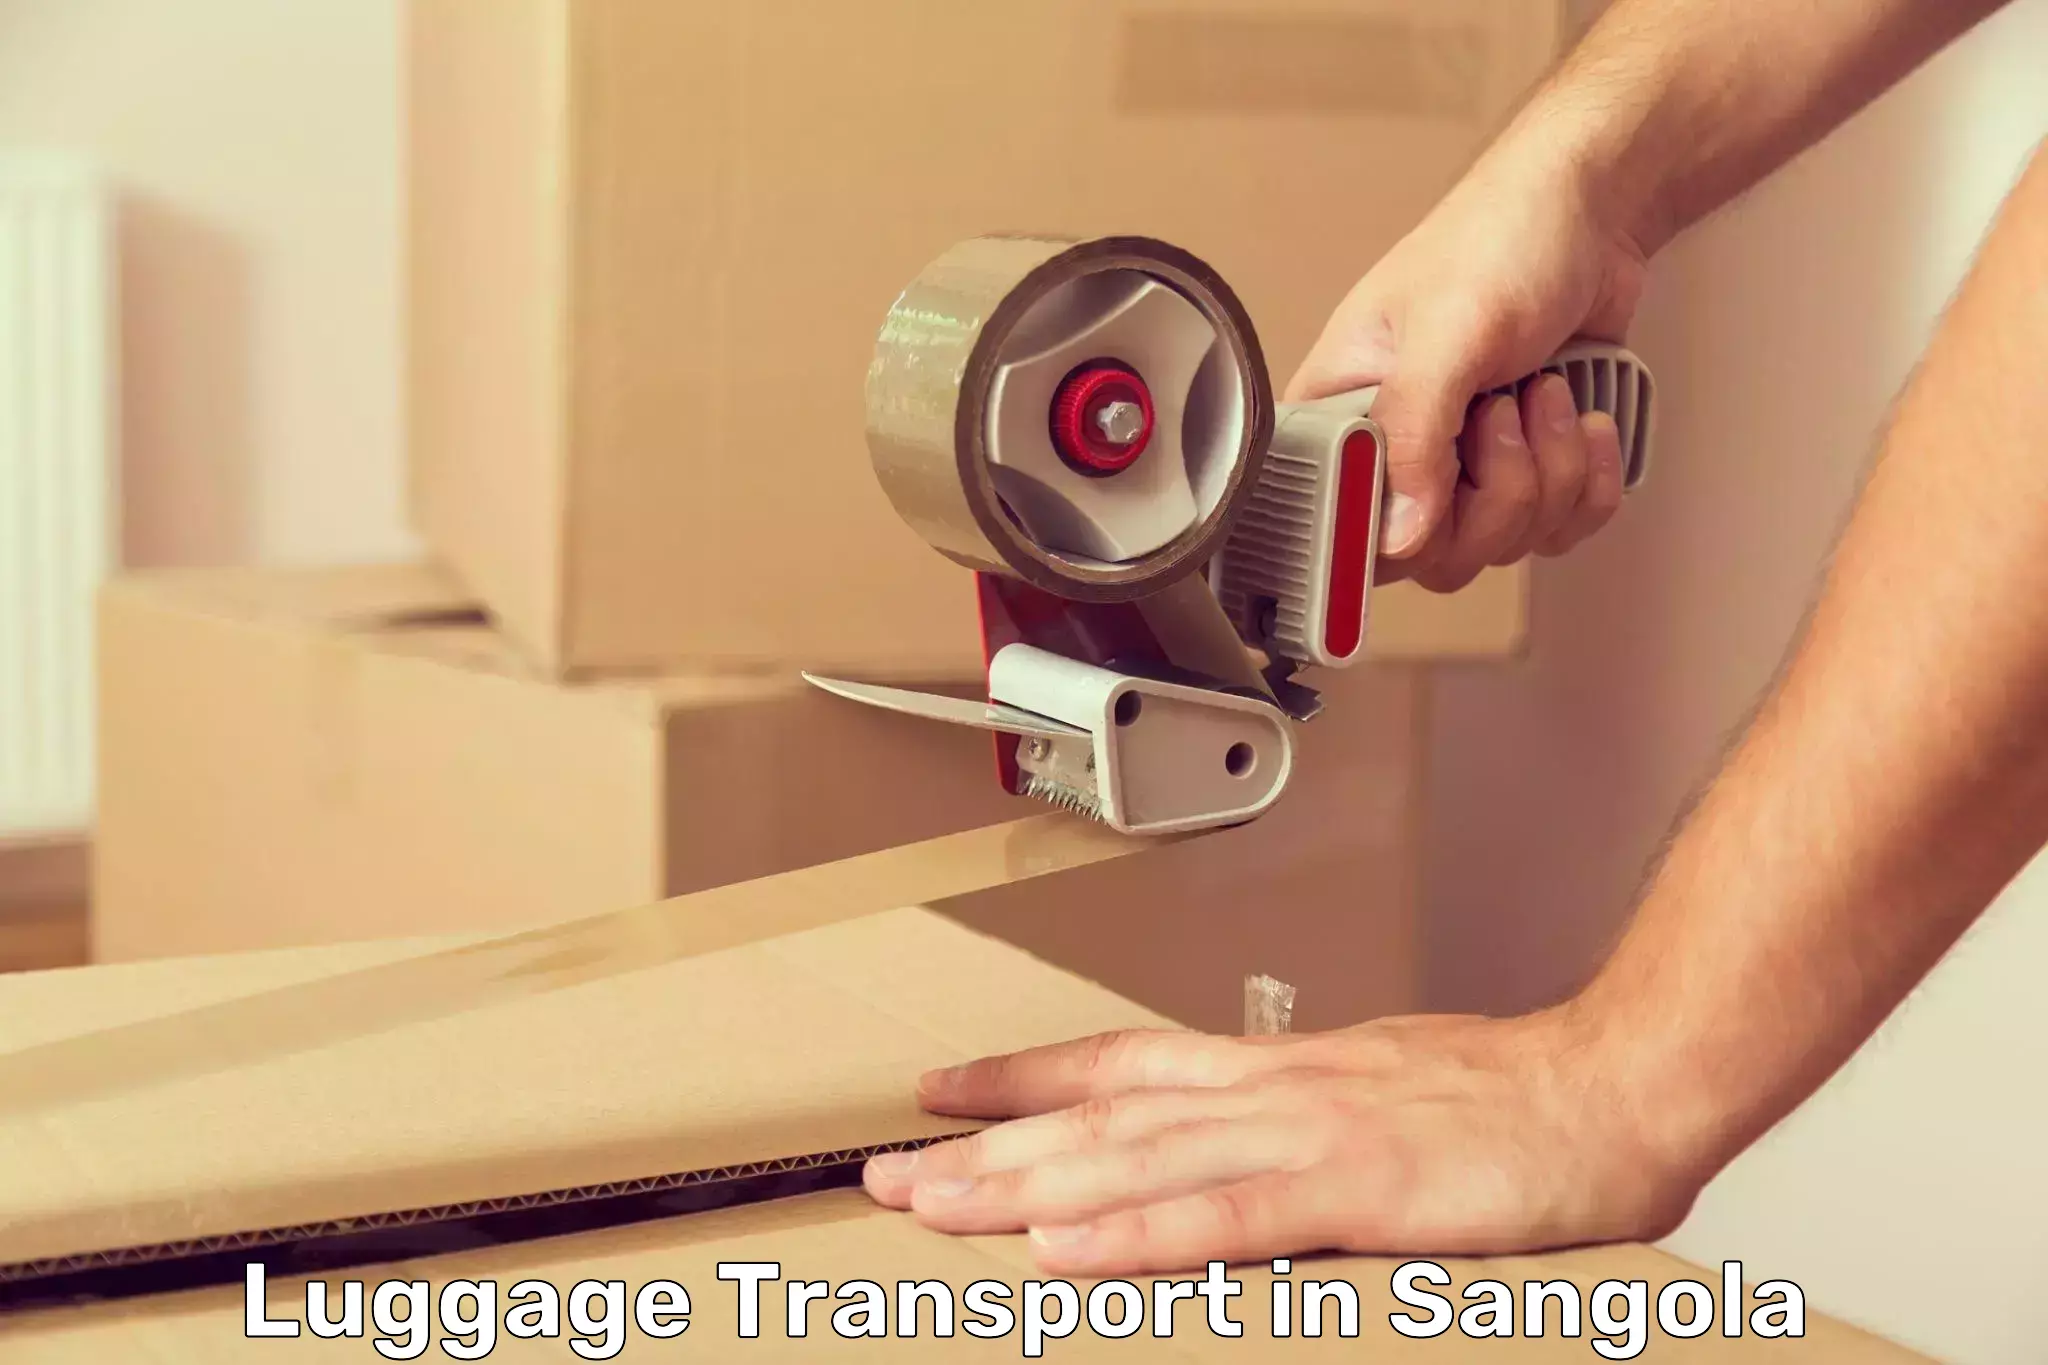 Luggage transport consulting in Sangola